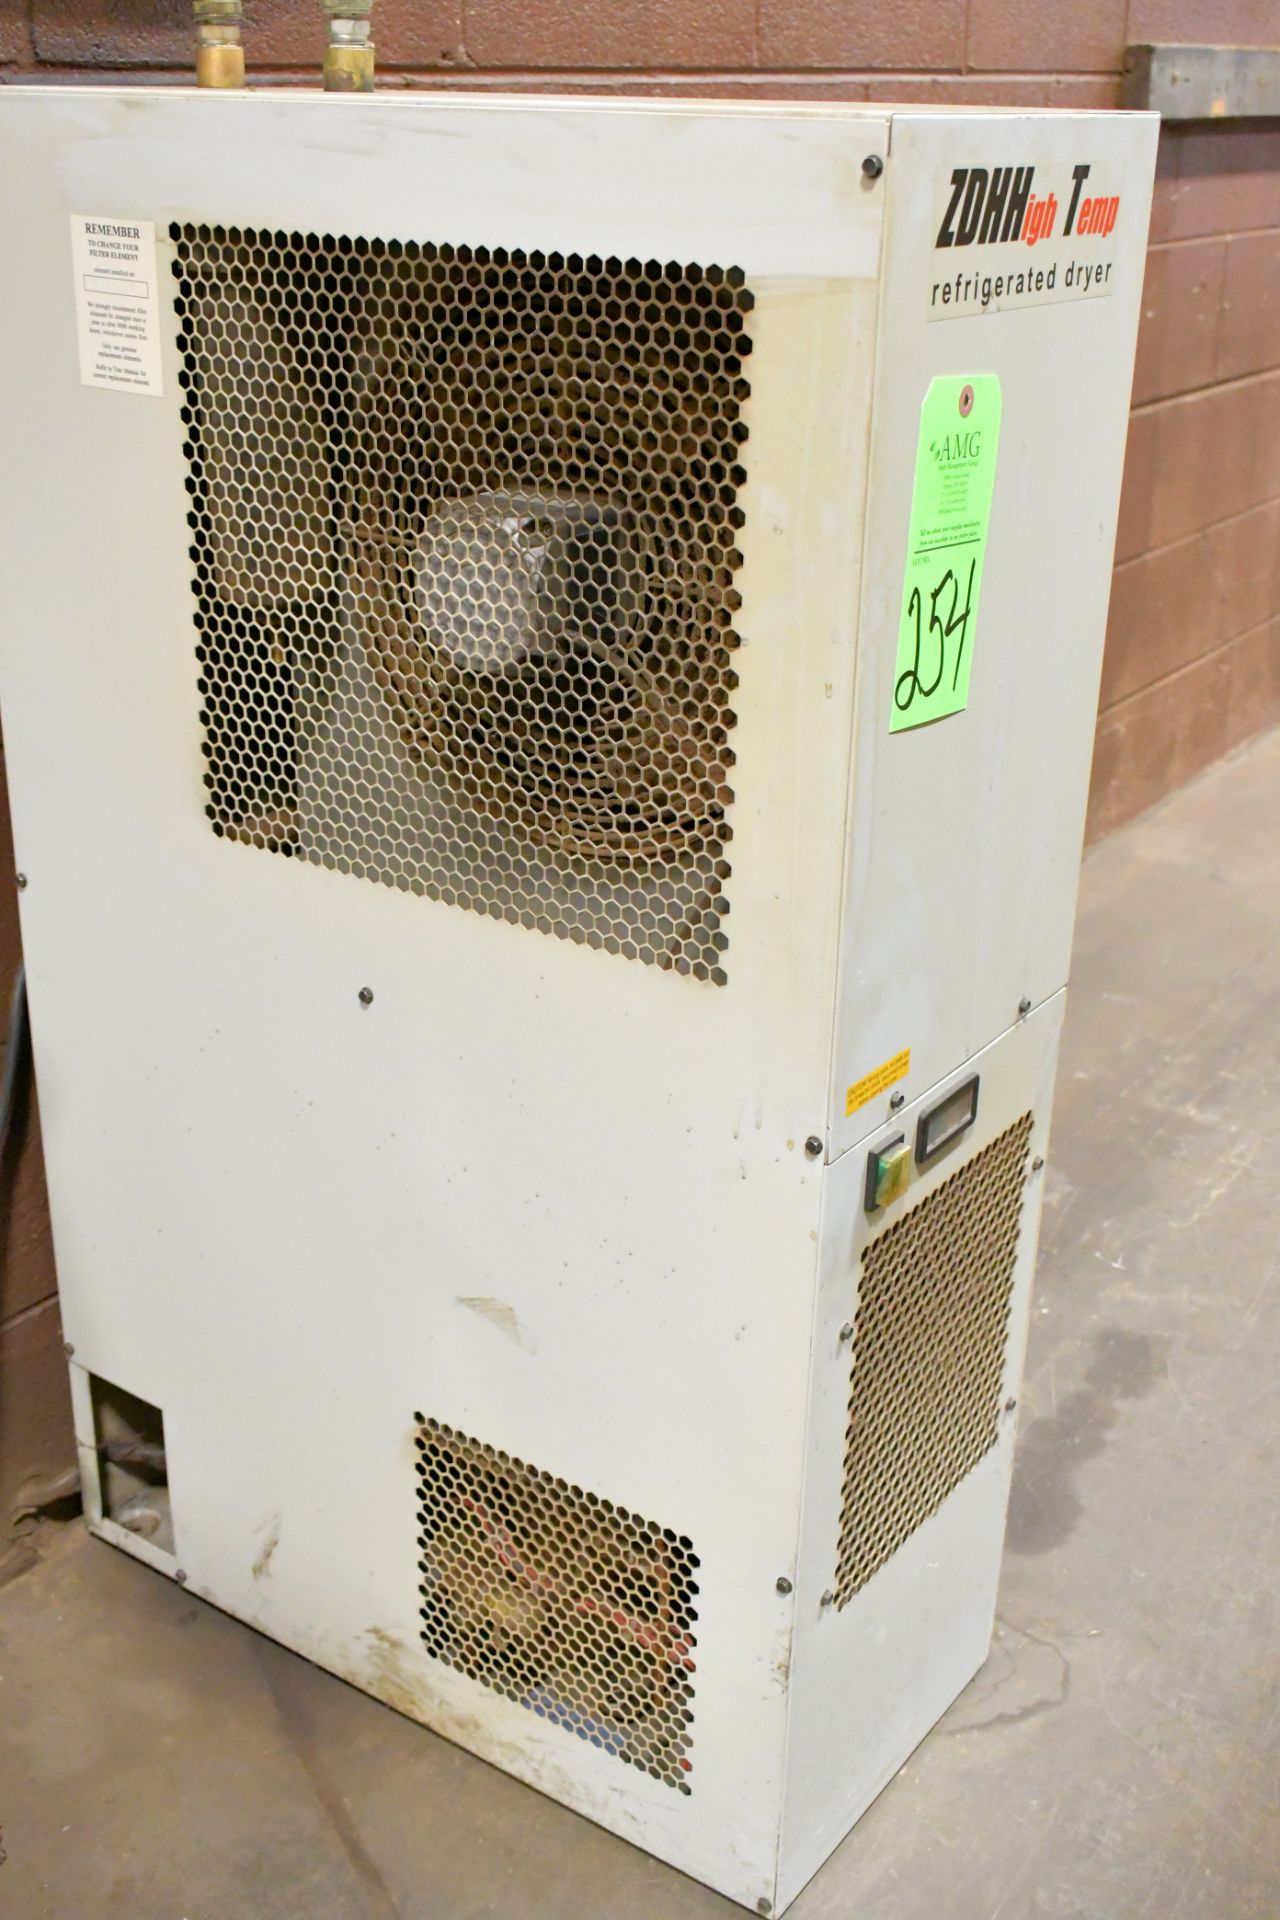 ZDH High Temp Refrigerated Dryer System - Image 3 of 3